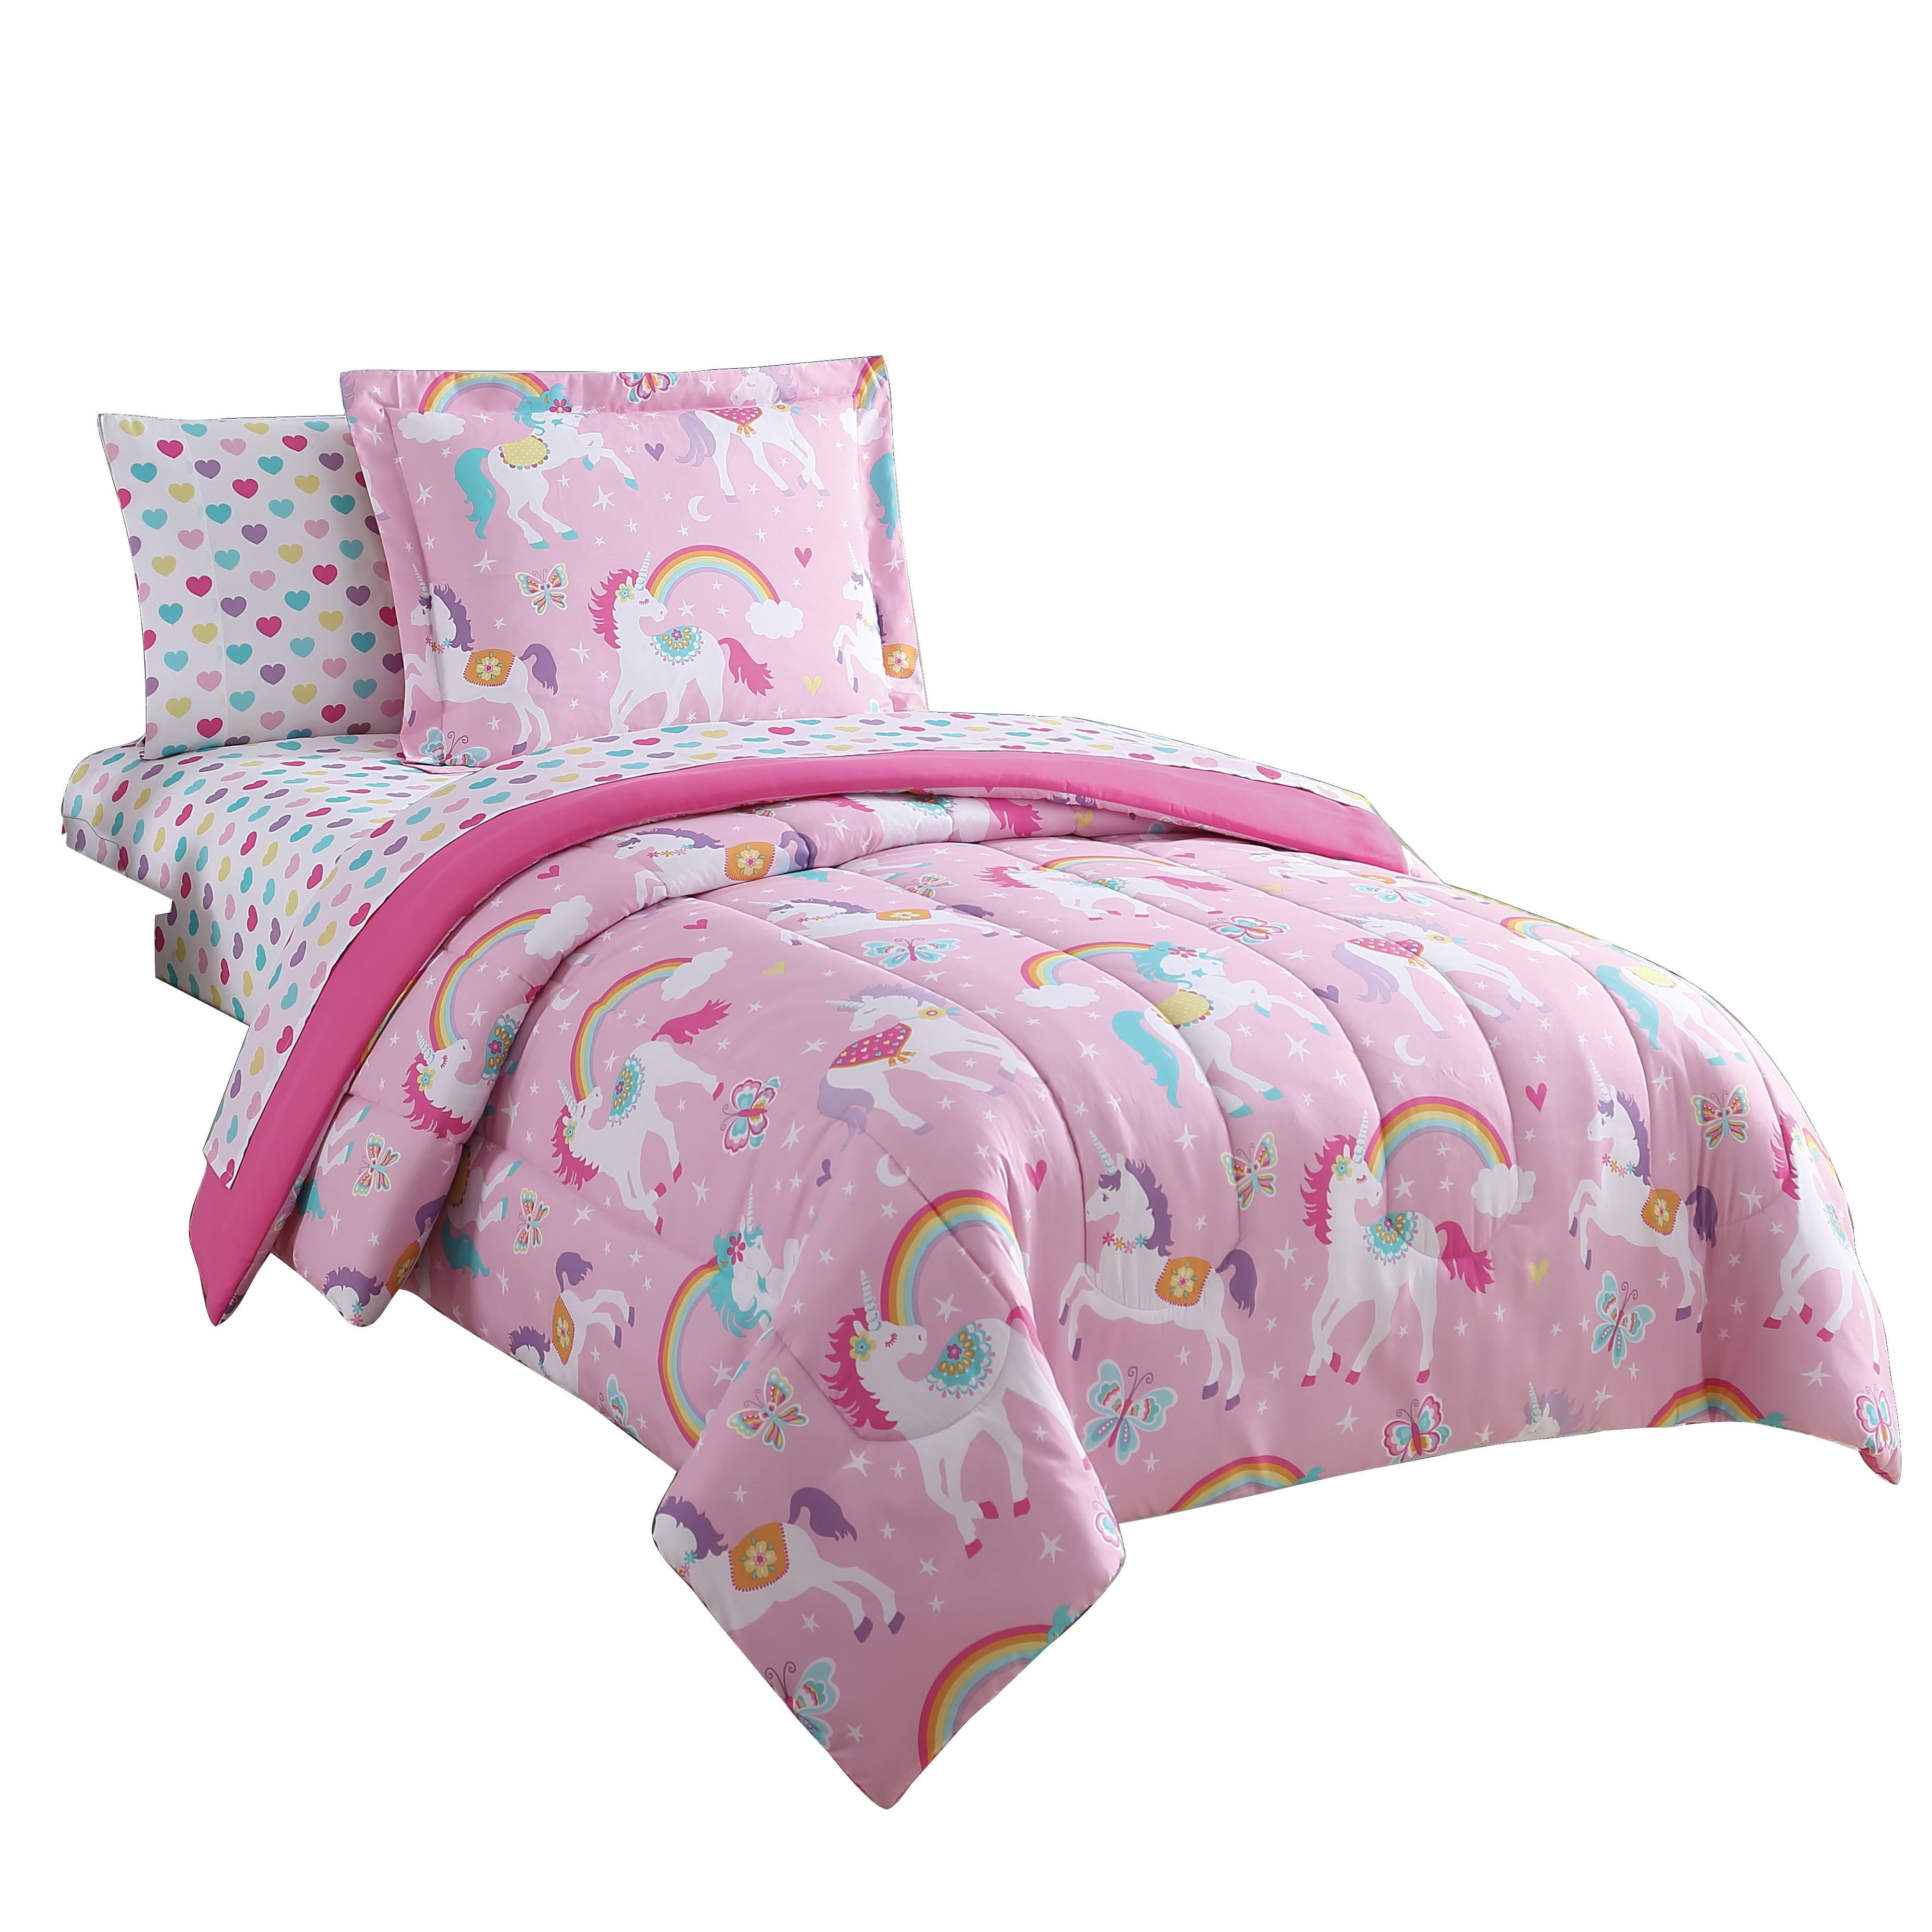 for sale online Mainstays Rainbow Unicorn Kids Bed-in-a-Bag Bedding Set Pink Twin OZJ00GS13PIN 